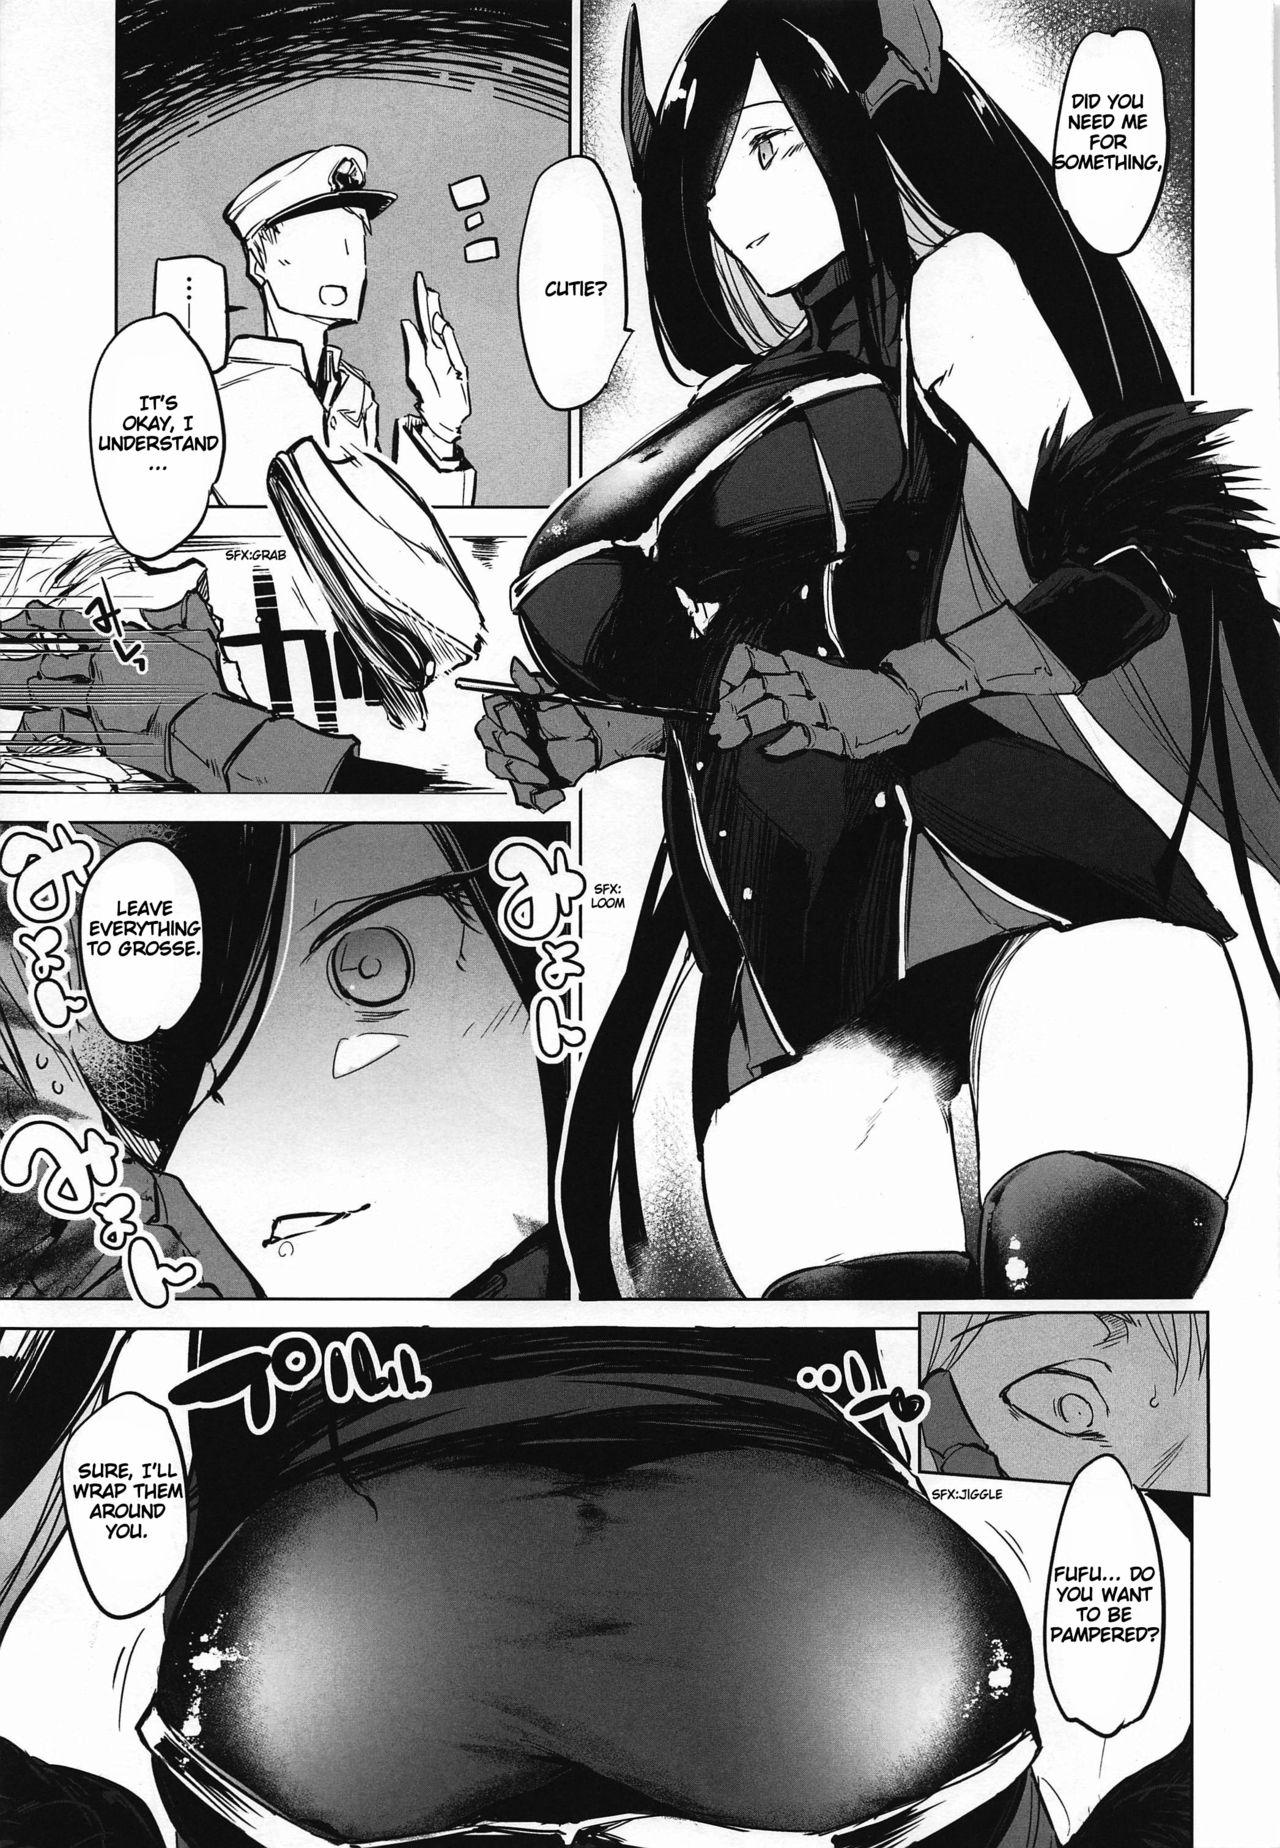 First Insufficient main force to shoot ! Iron-Blood Battleship and Battle Cruiser Summary Book - Azur lane Sex Pussy - Page 12